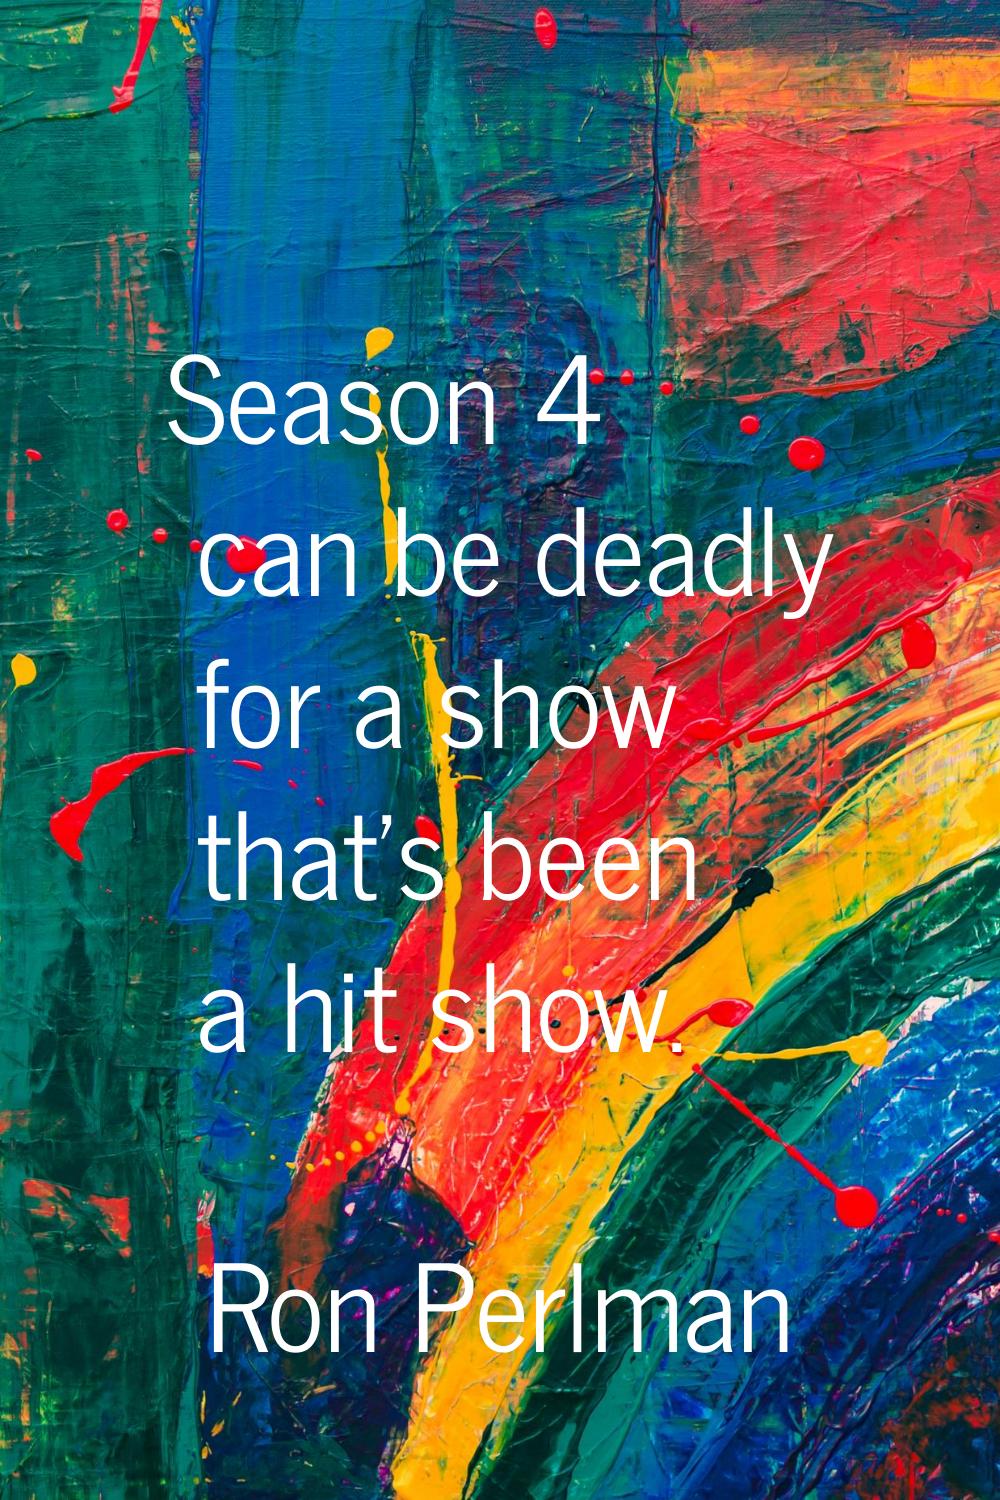 Season 4 can be deadly for a show that's been a hit show.